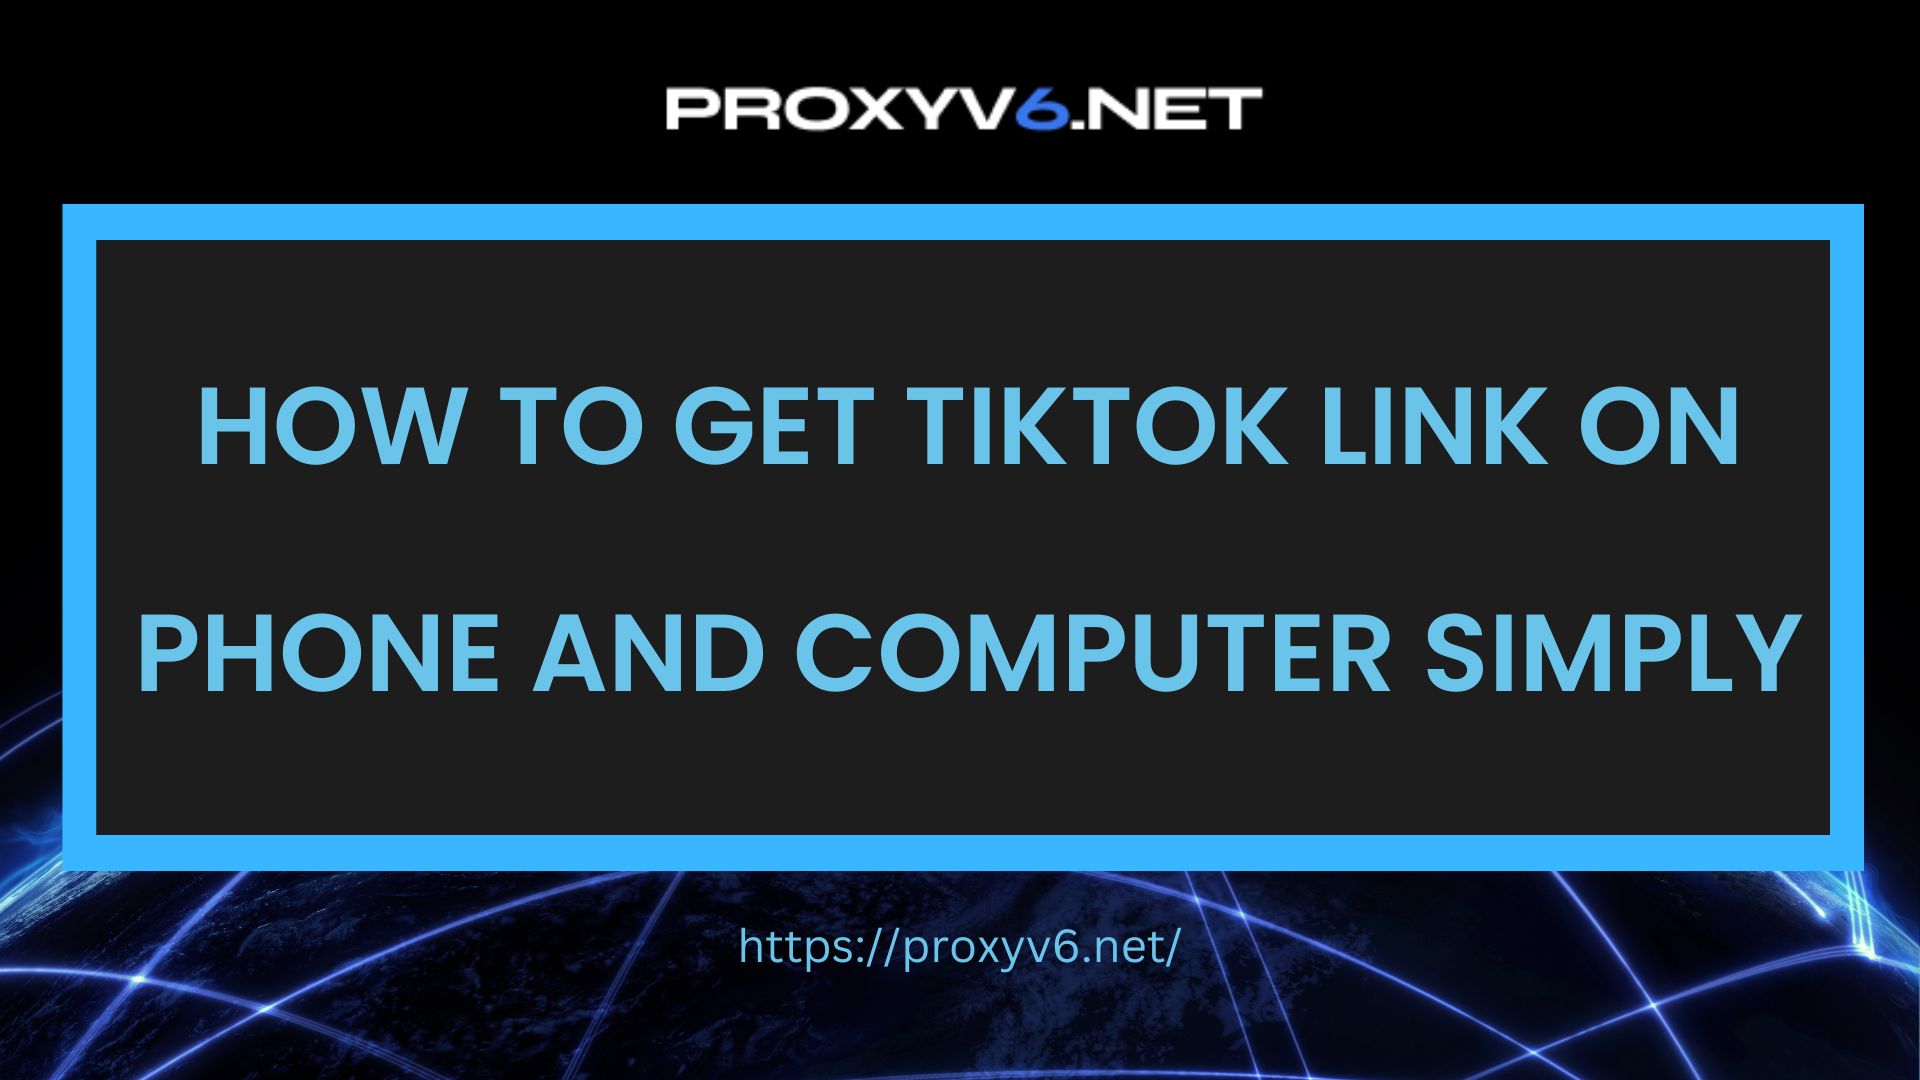 How to get TikTok link on phone and computer simply